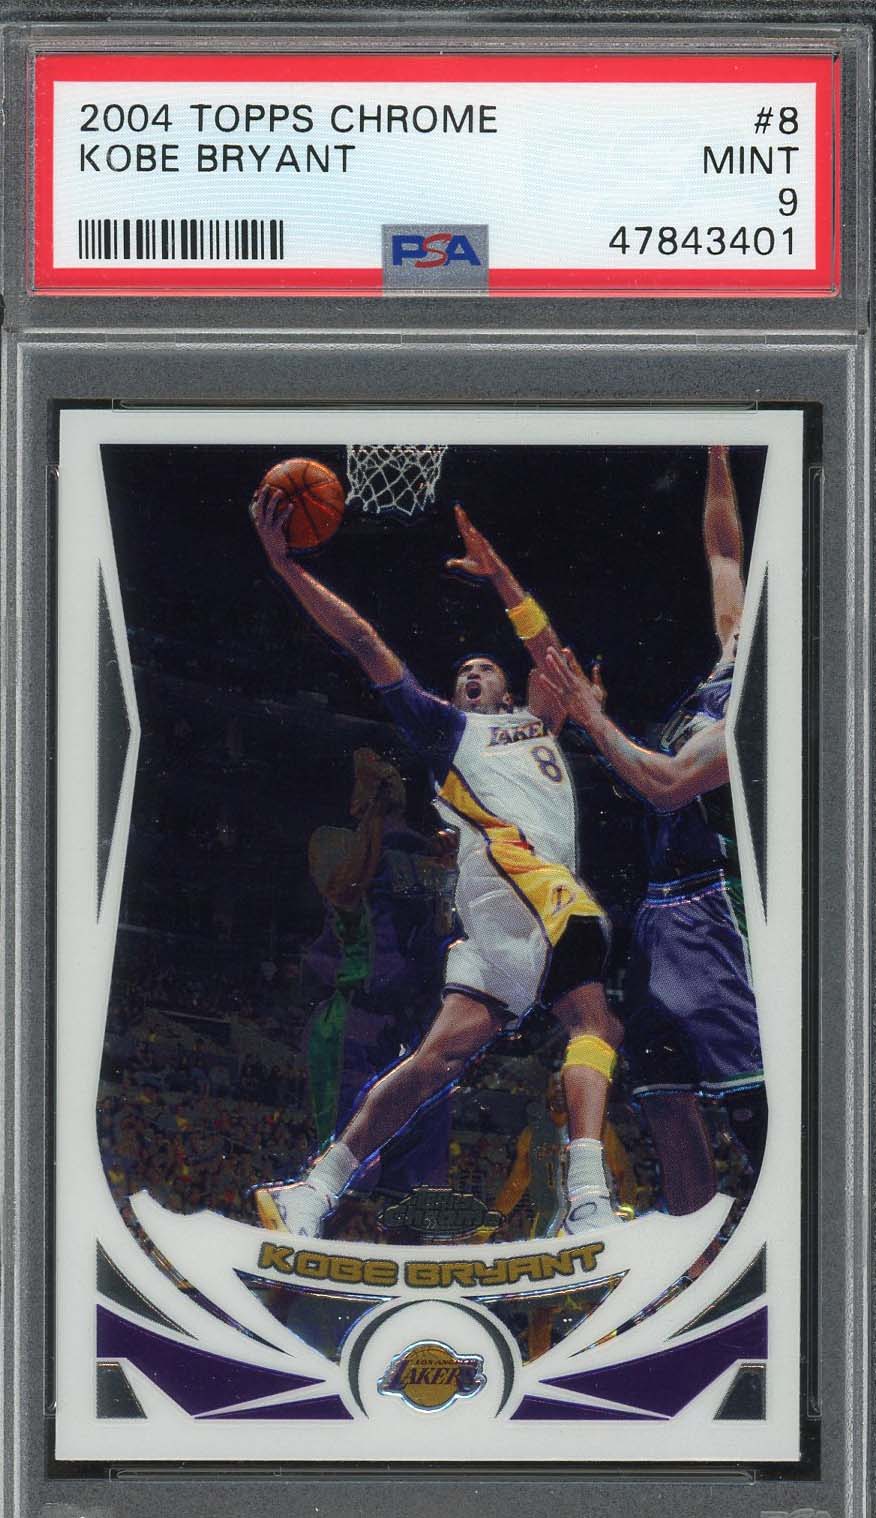 Framed White Kobe Bryant #24 Lakers Jersey (UNSIGNED) –